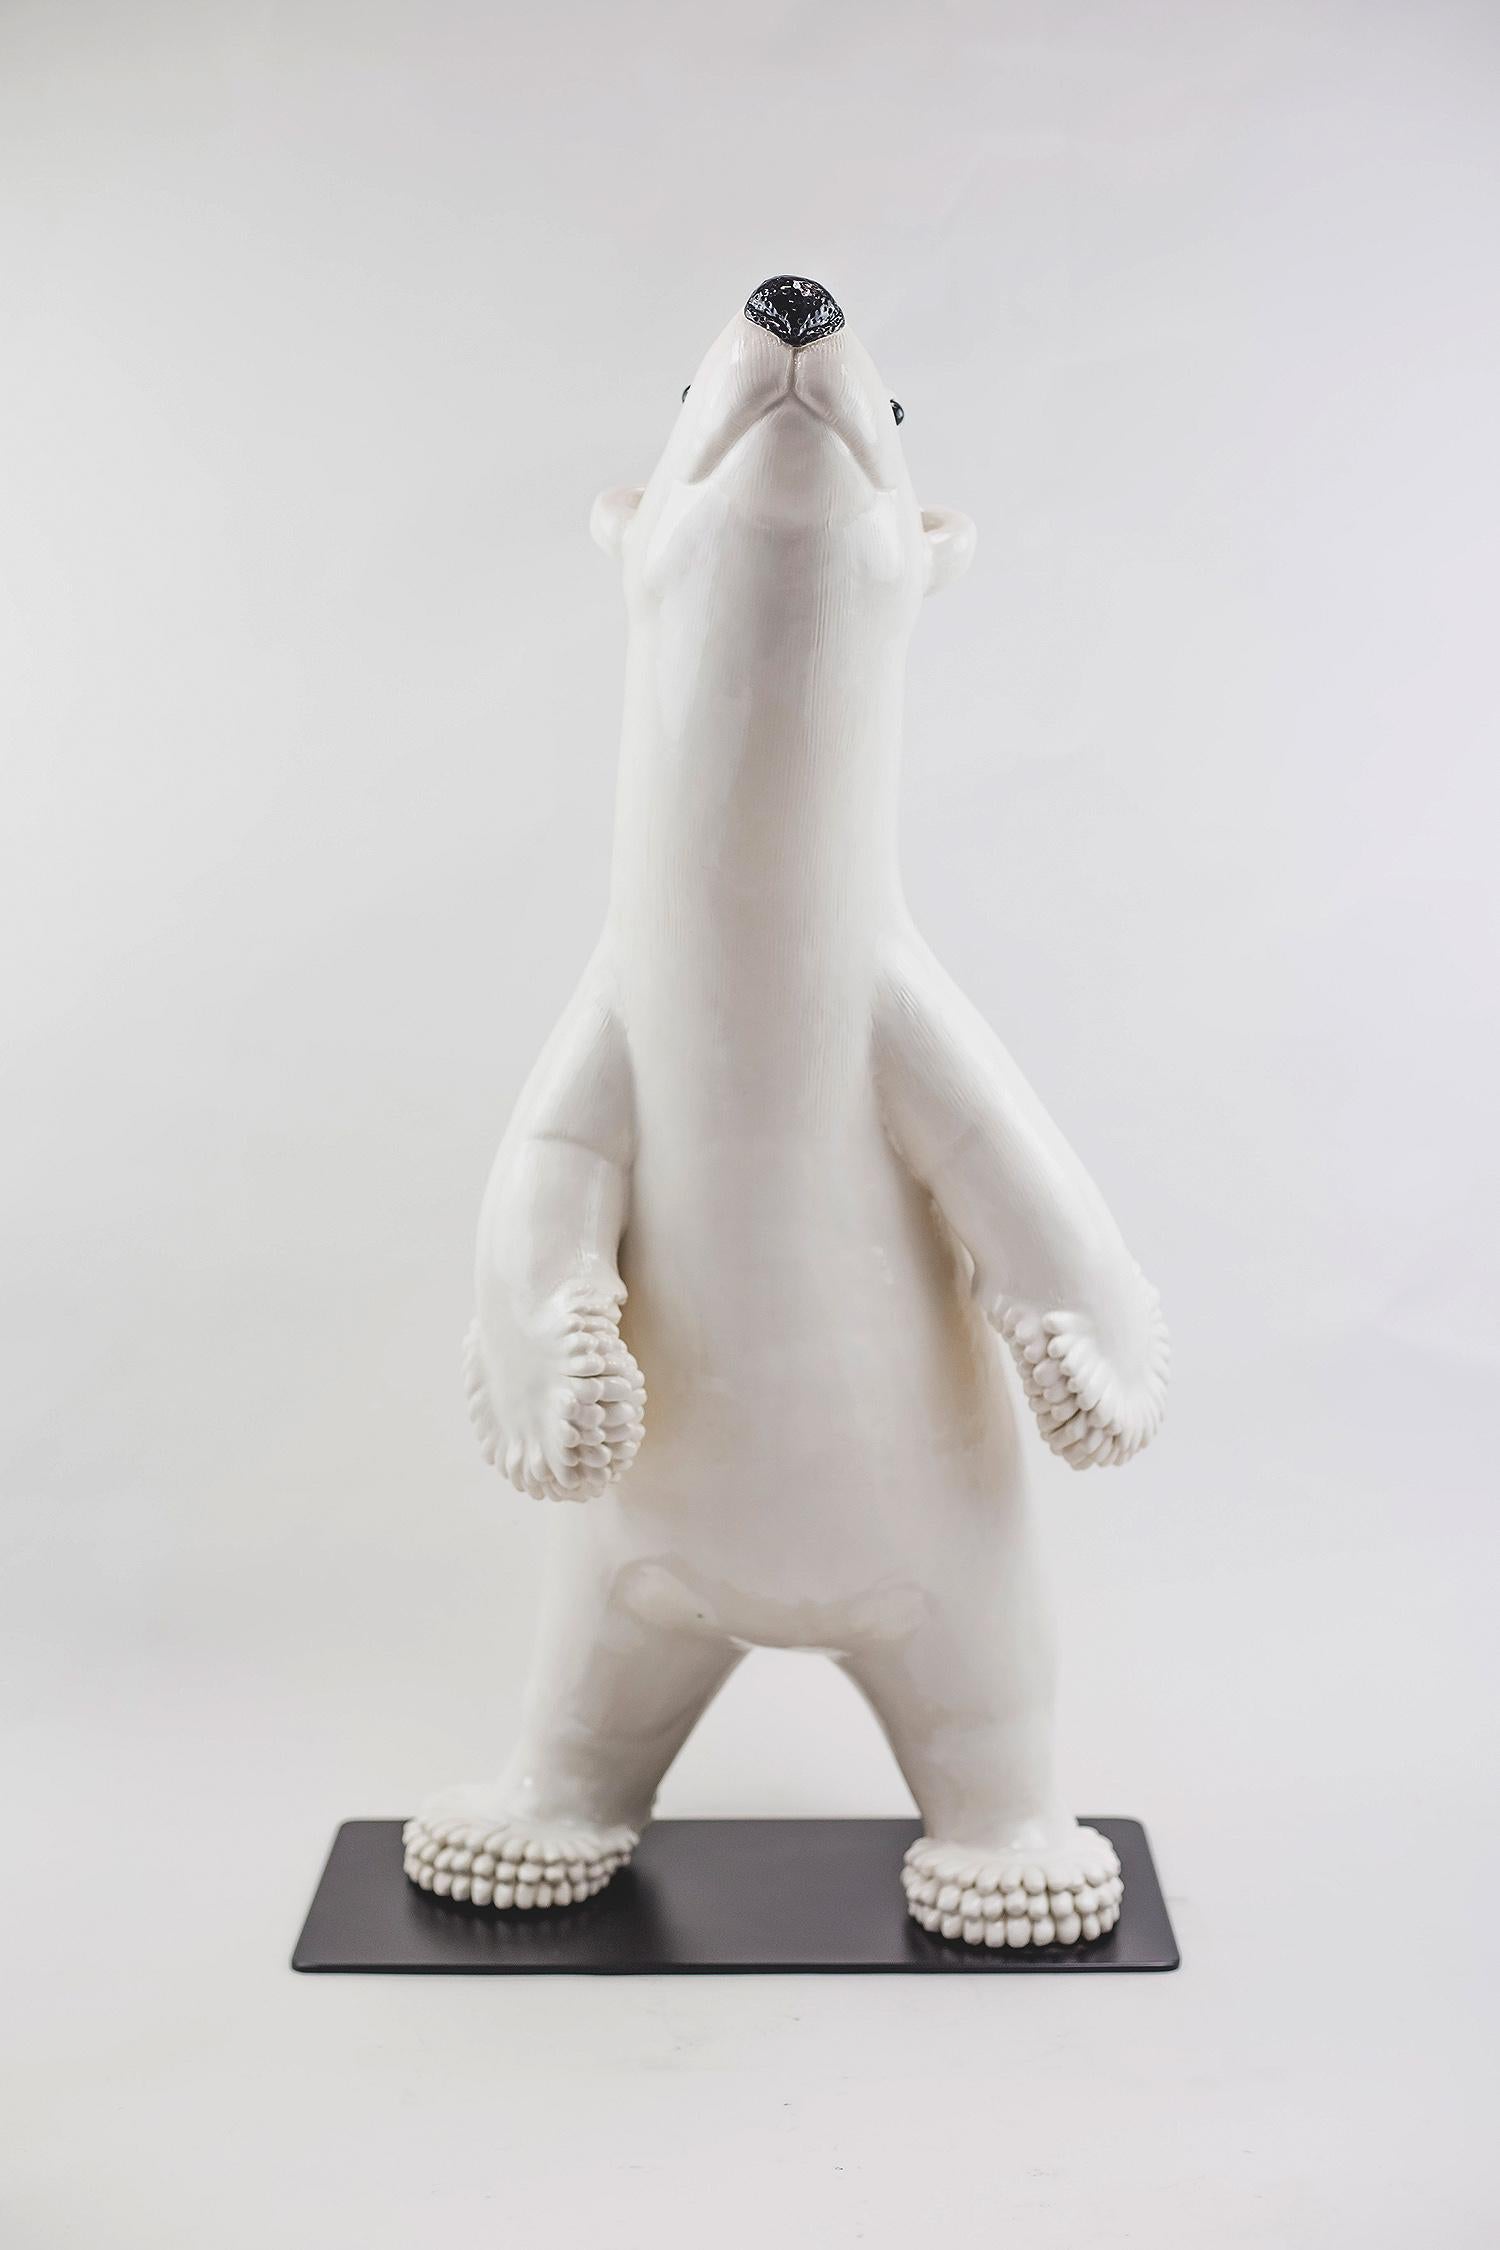 Sculpture representing a polar bear in glazed eartheware.
French work realized by the French artist Valerie Courtet, trained by Jacques Pieffer, Meilleur Ouvrier de France, in the Saint Jean l'Aigle de Longwy Manufactory.